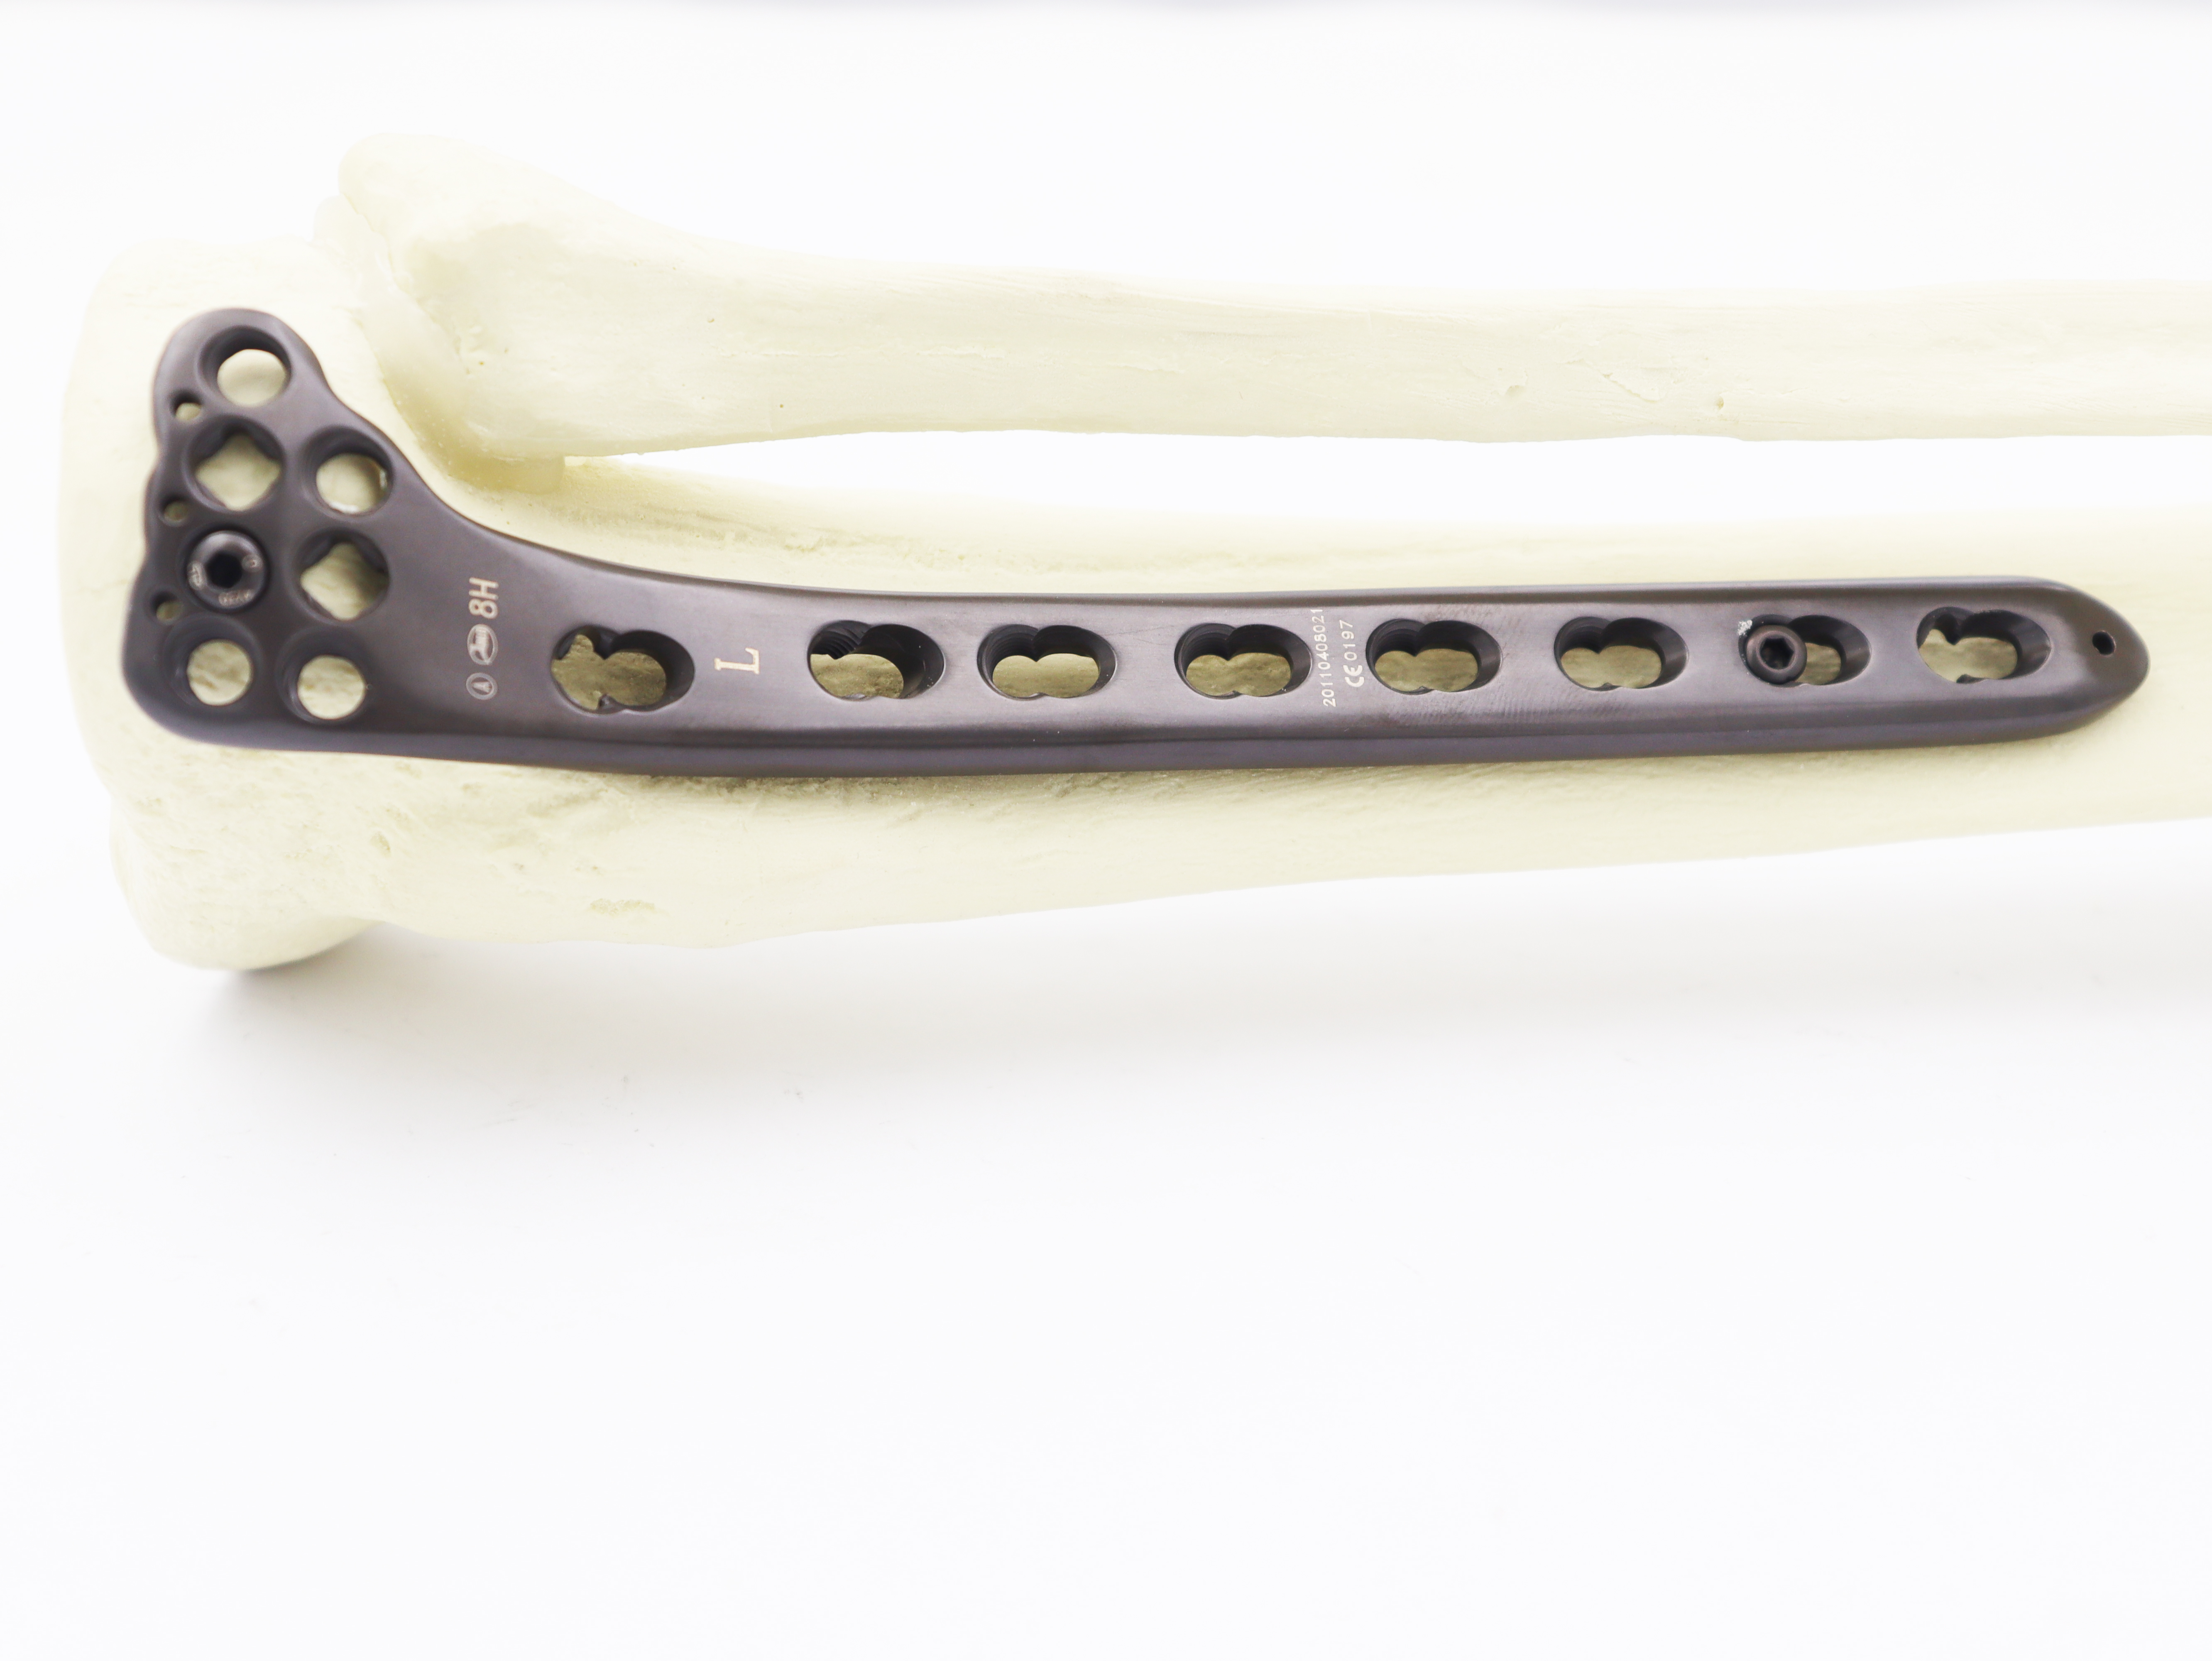 Orthopedic surgical Implants Proximal Tibial Lateral Locking plate for bone fracture